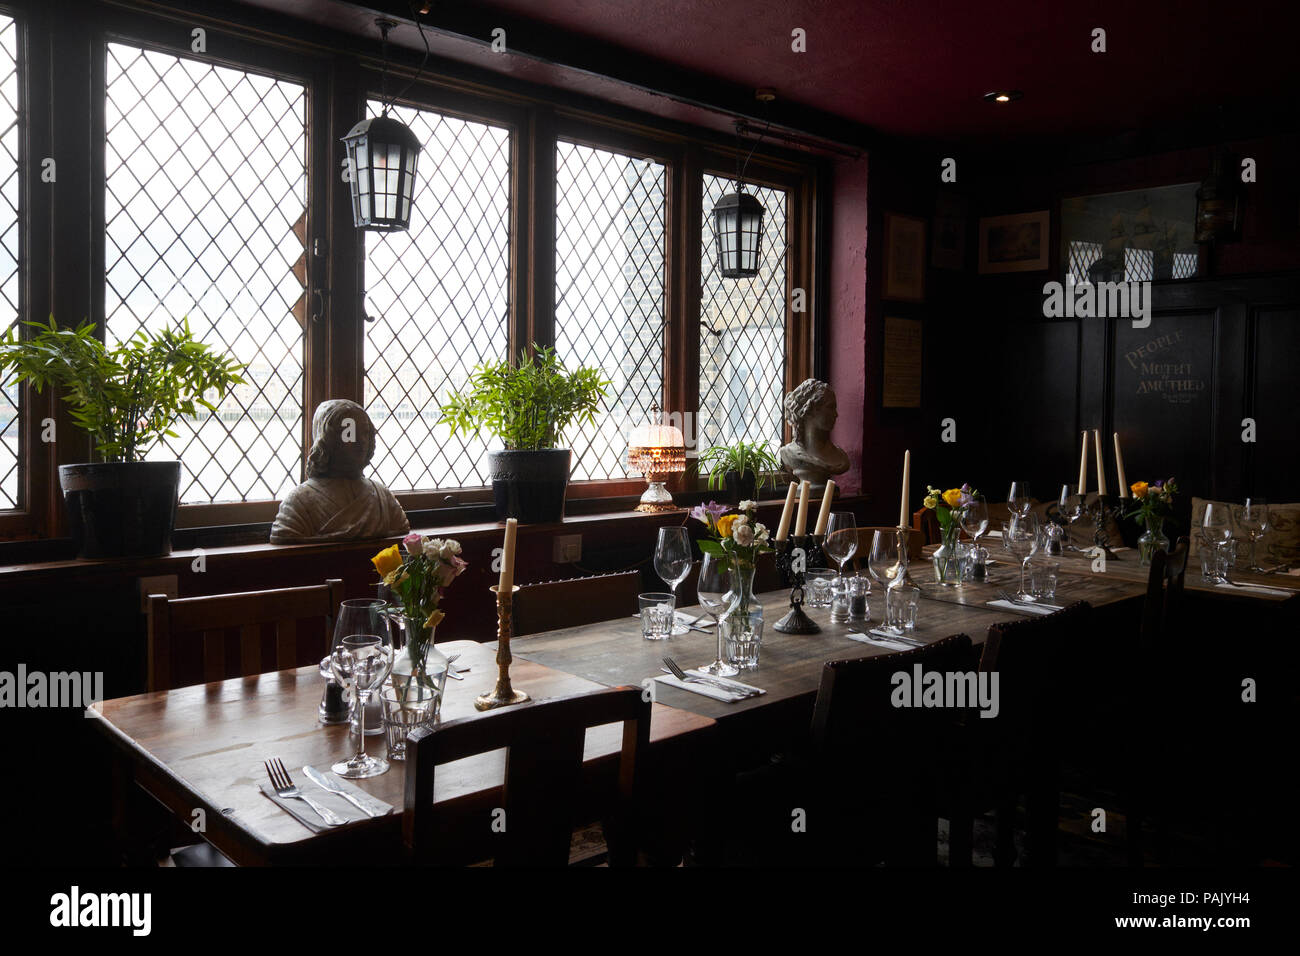 The dining room at the Mayflower pub, Rotherhithe, London, UK Stock Photo